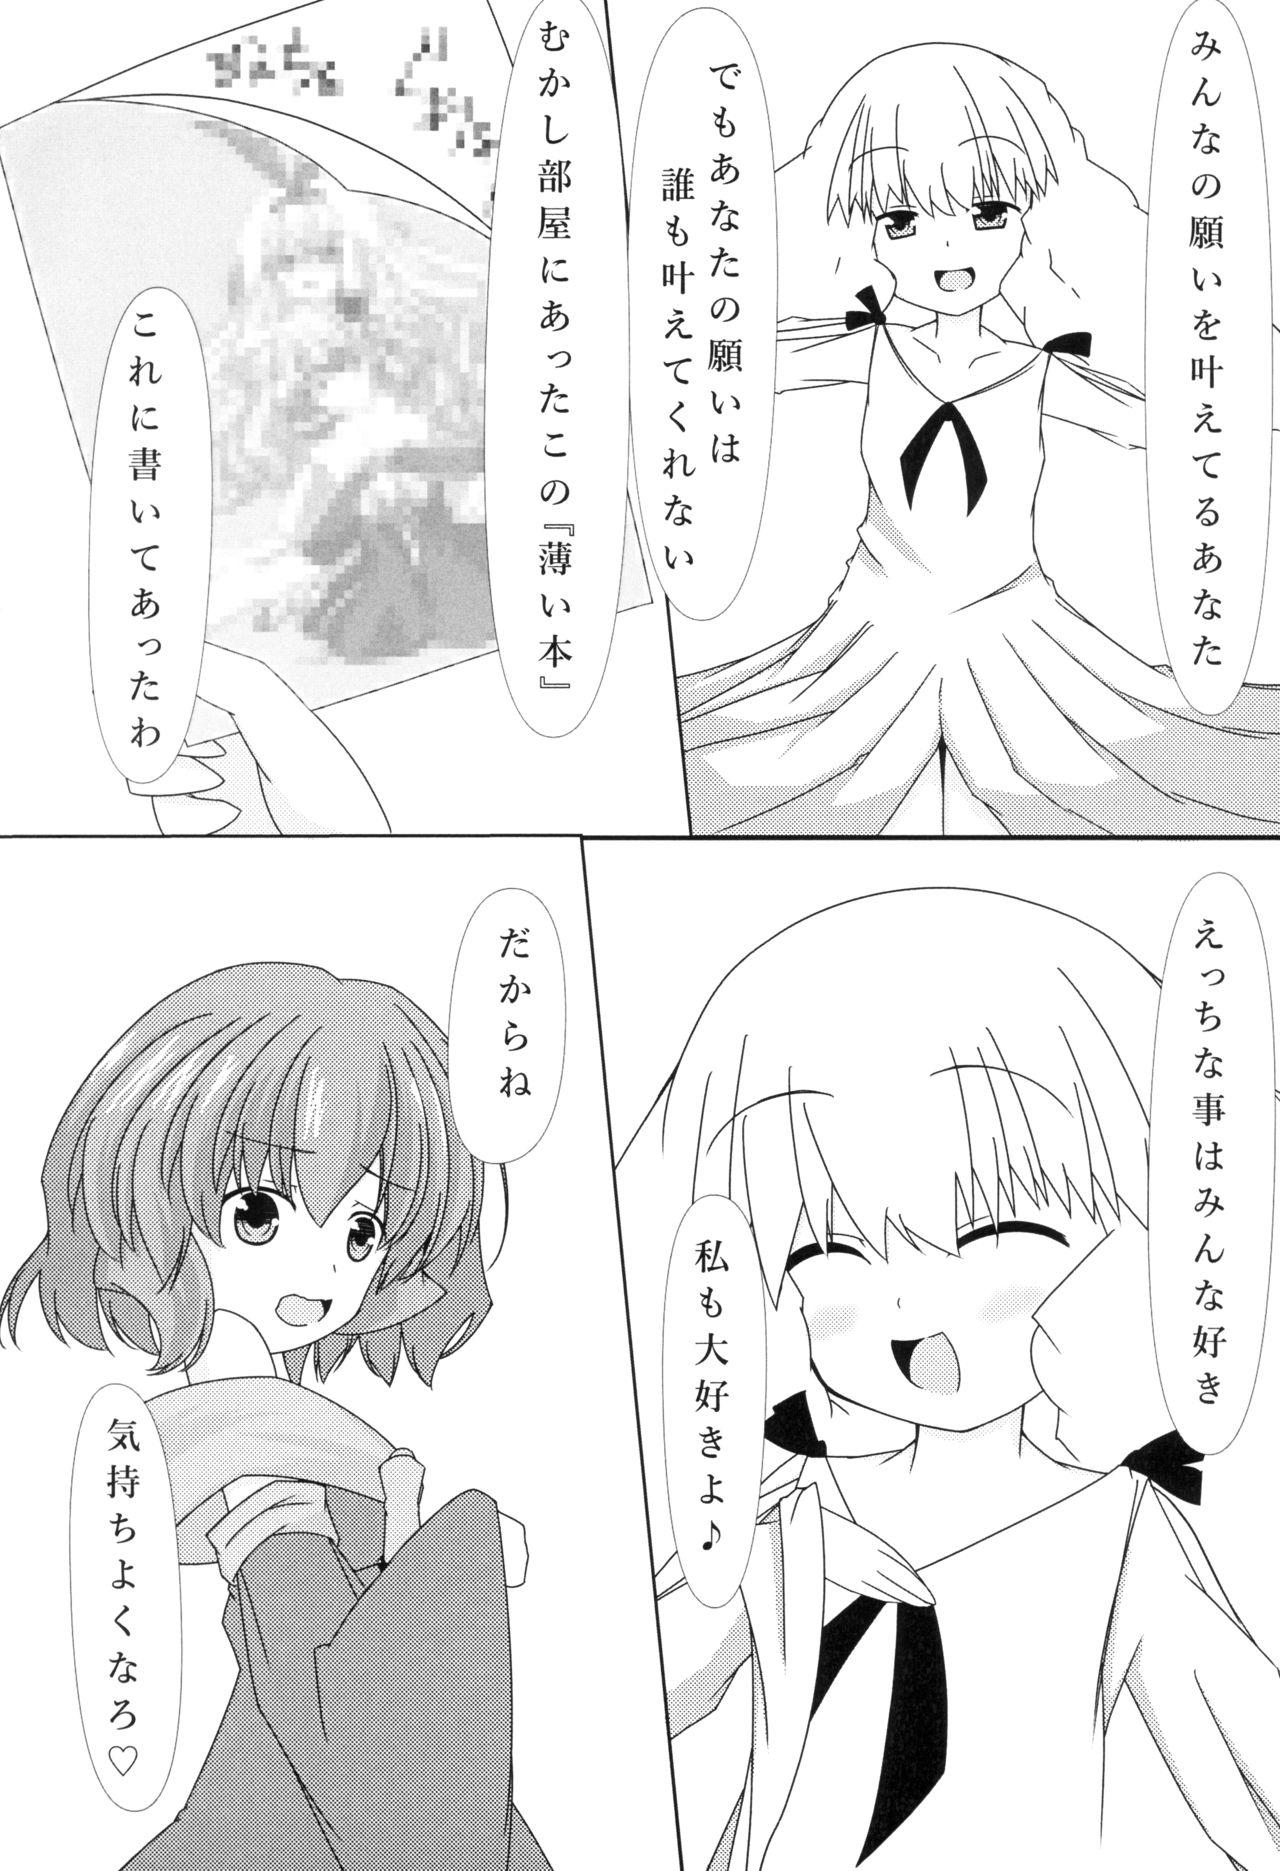 Amigo ピルルクたん発情中 - Selector infected wixoss Gay Hunks - Page 6